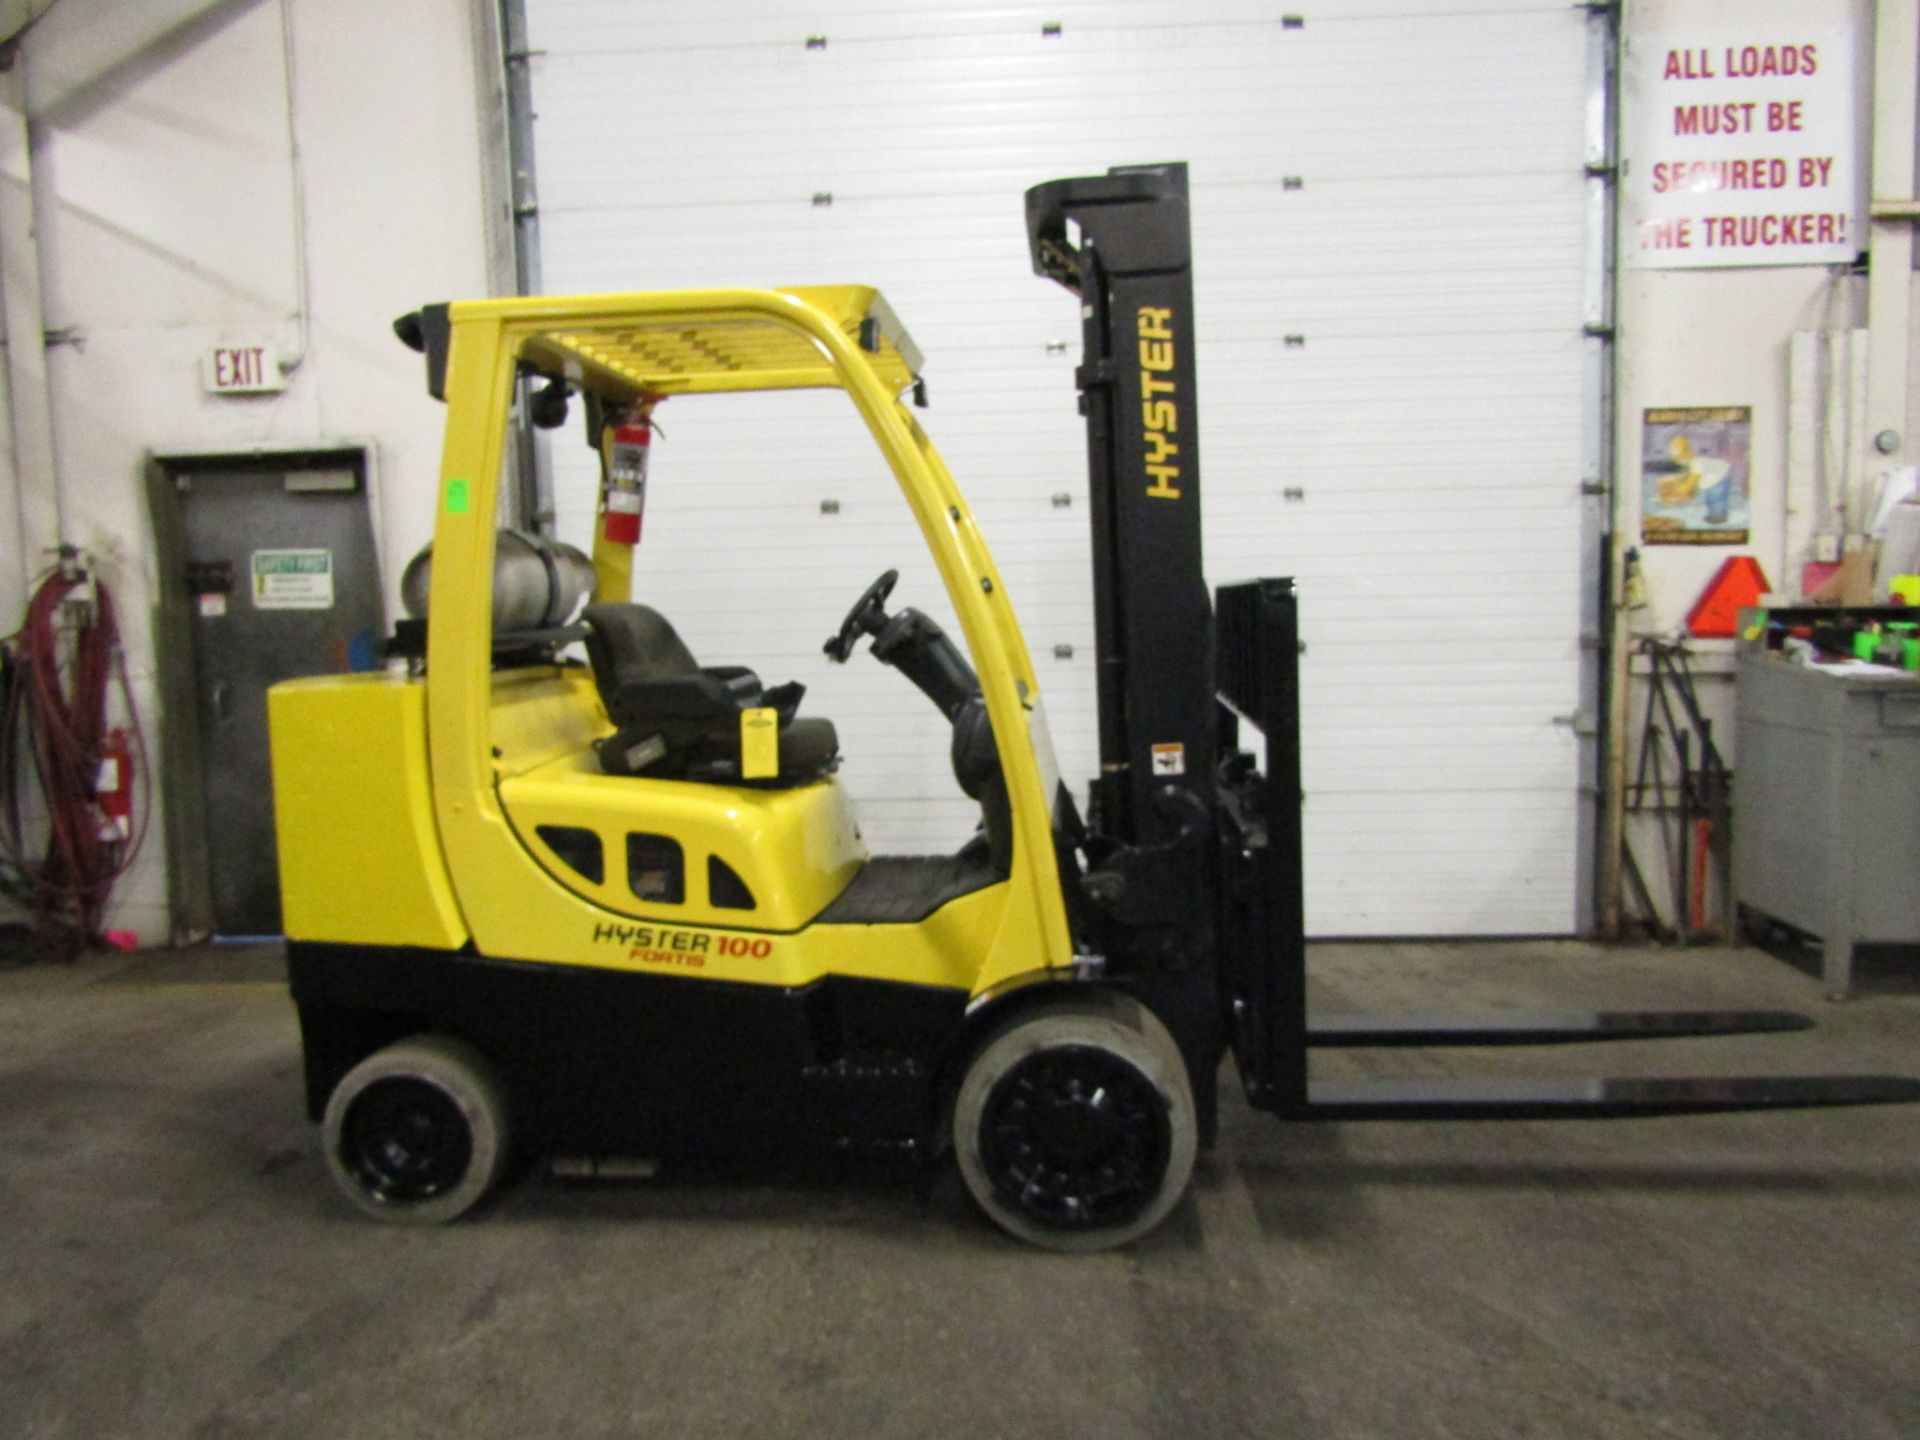 2008 Hyster 10000lbs capacity Forklift LPG (propane) with sideshift with 60" forks (no tank